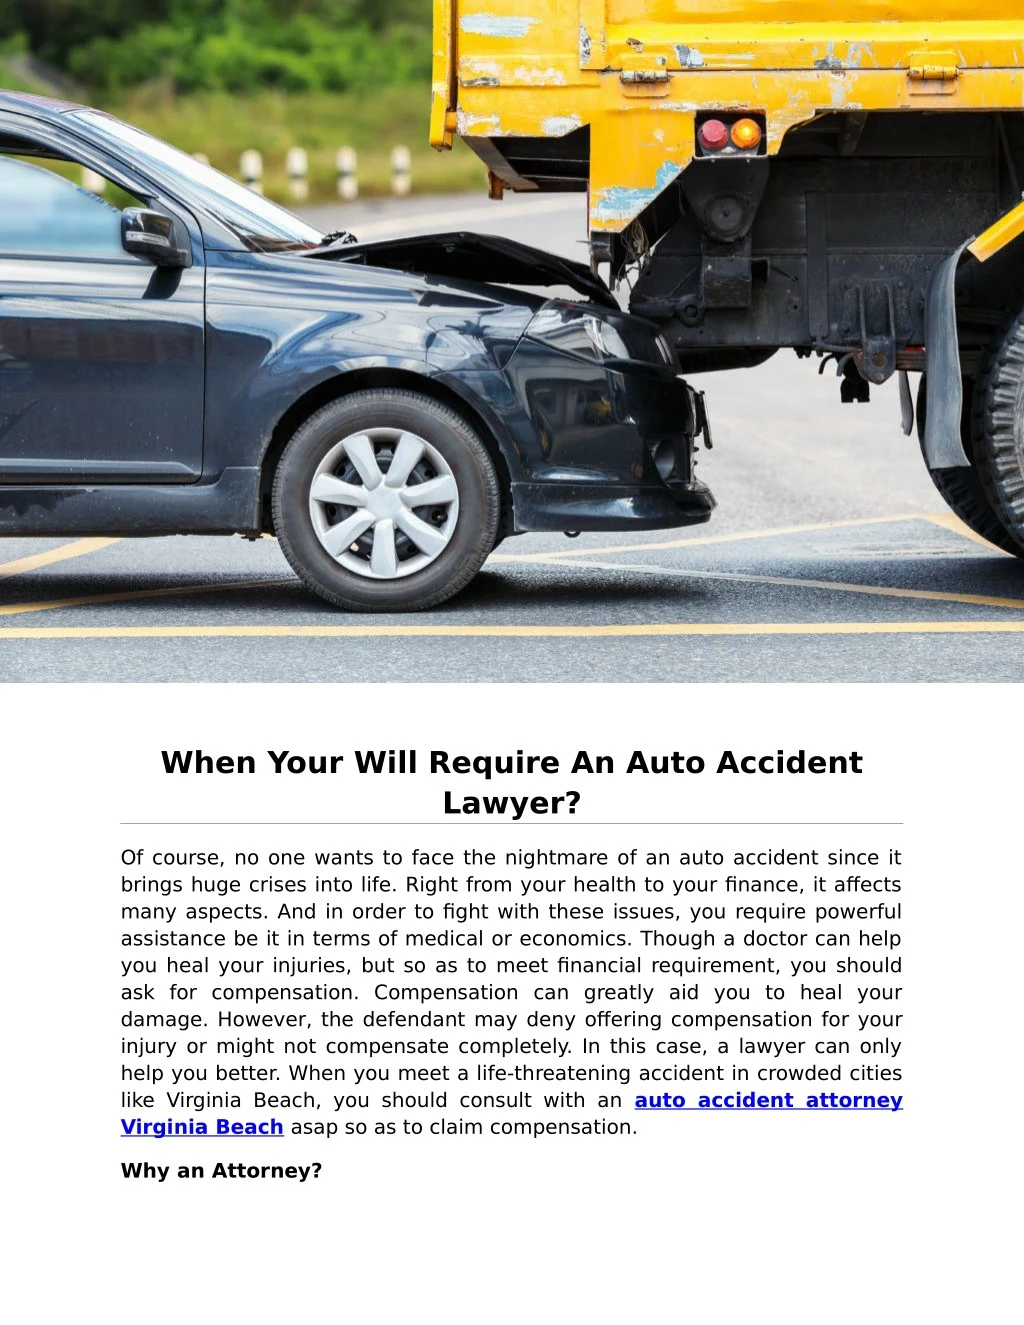 when your will require an auto accident lawyer